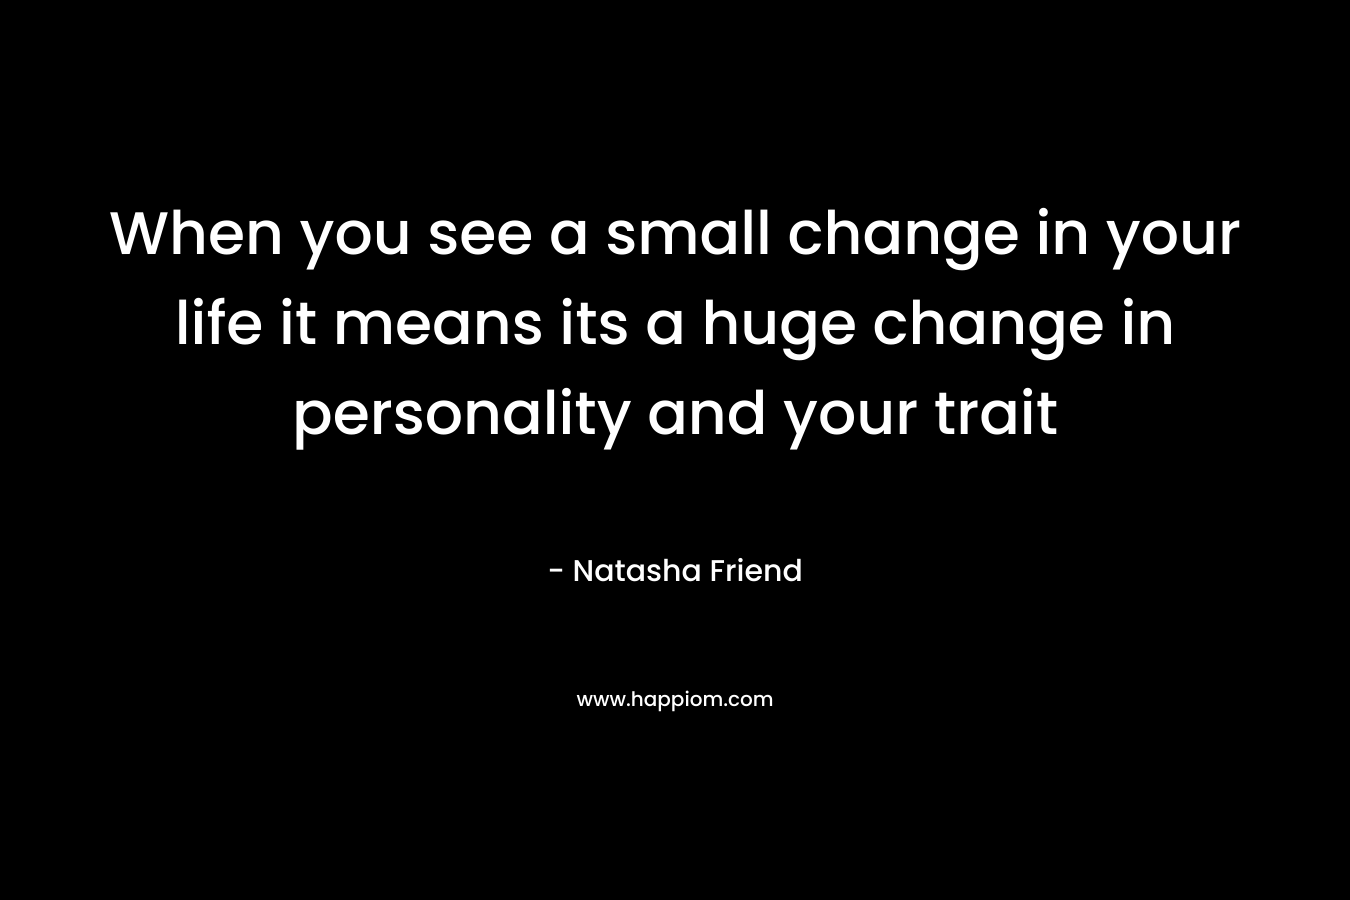 When you see a small change in your life it means its a huge change in personality and your trait